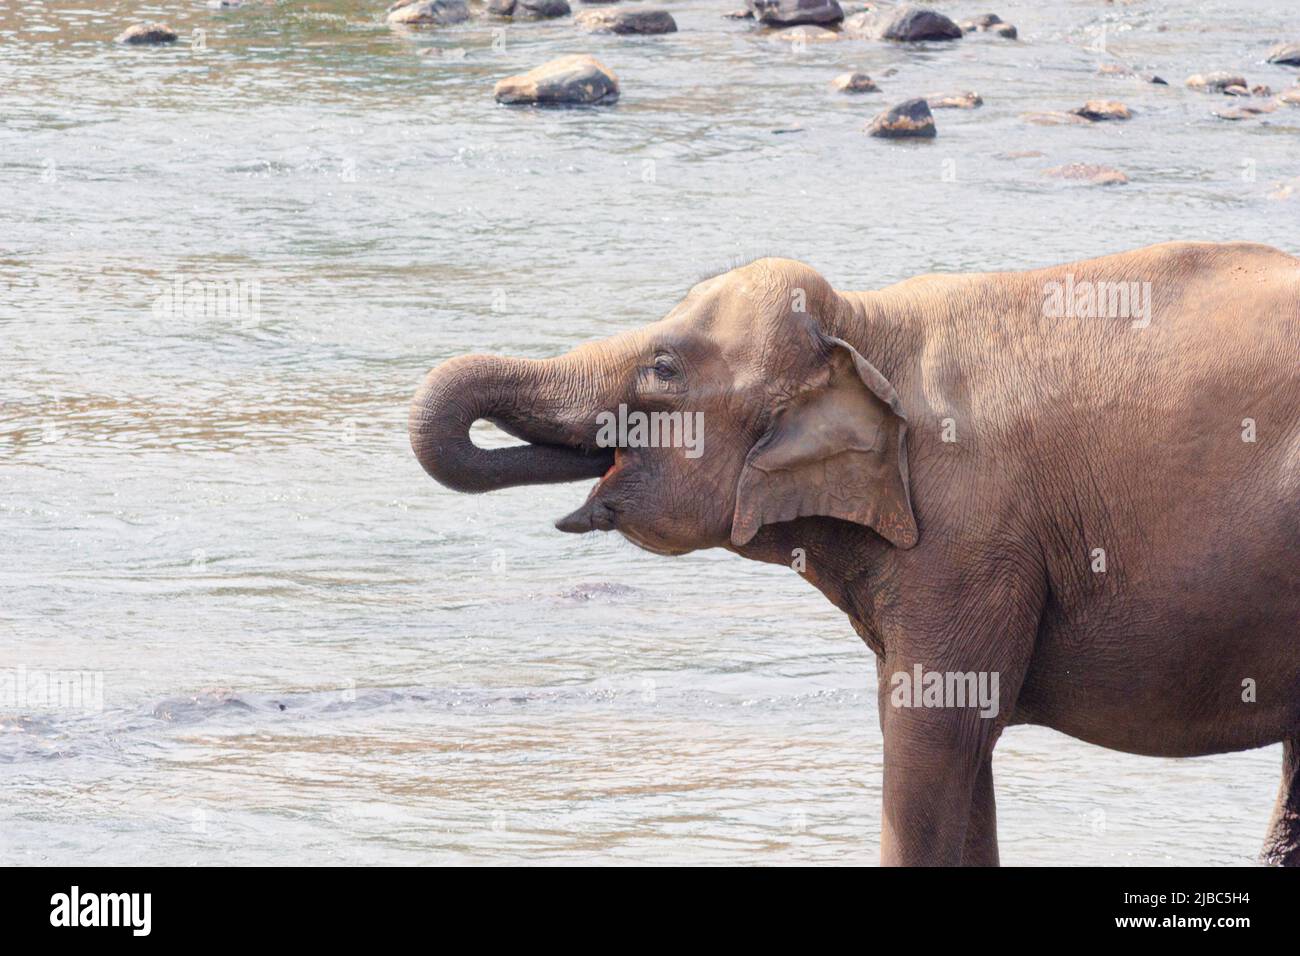 A juvenile Asian elephant in Sri Lanka drinks water from the river she is standing in. Stock Photo